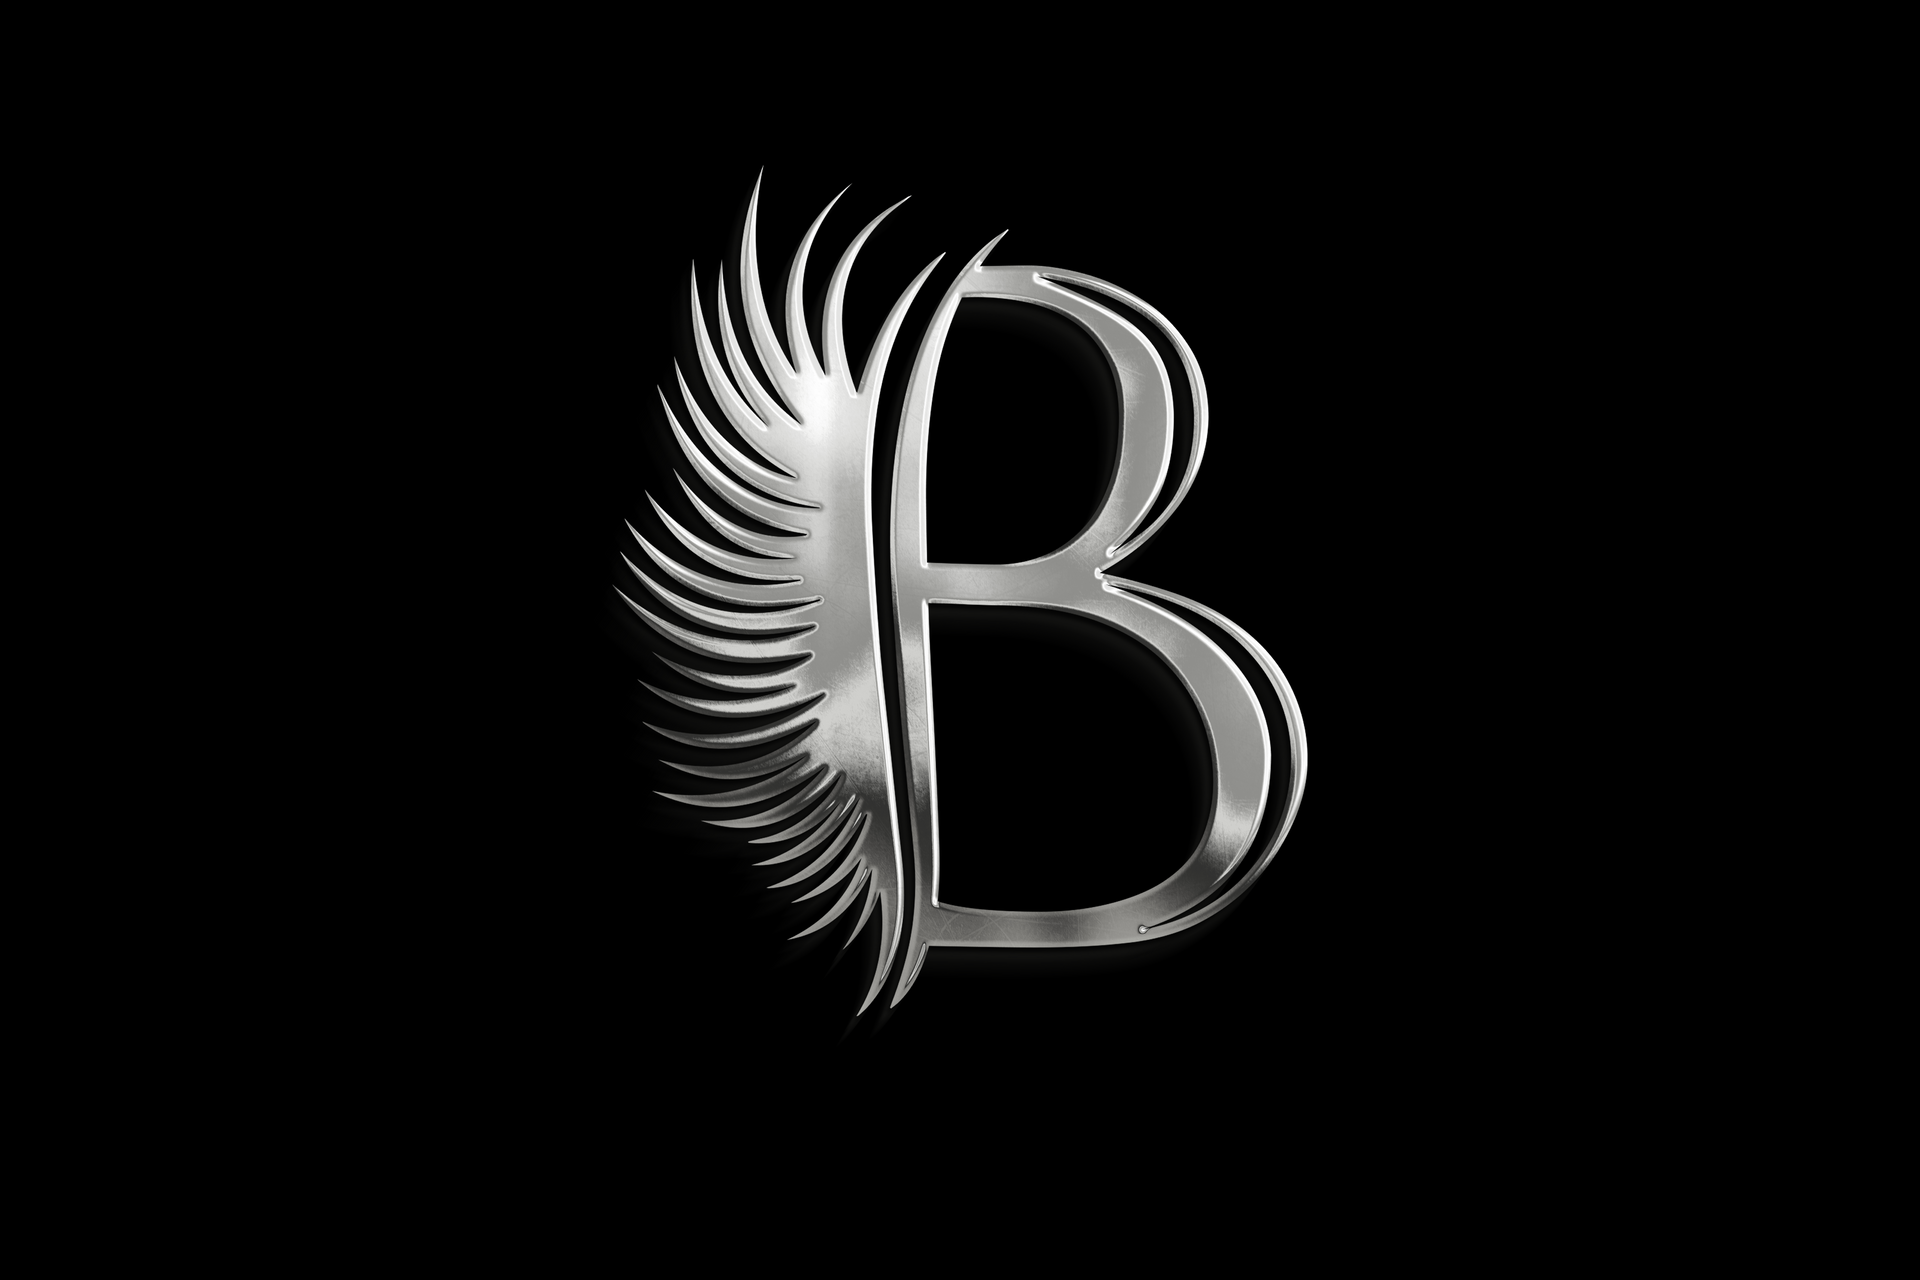 The letter b is surrounded by a feather on a black background.